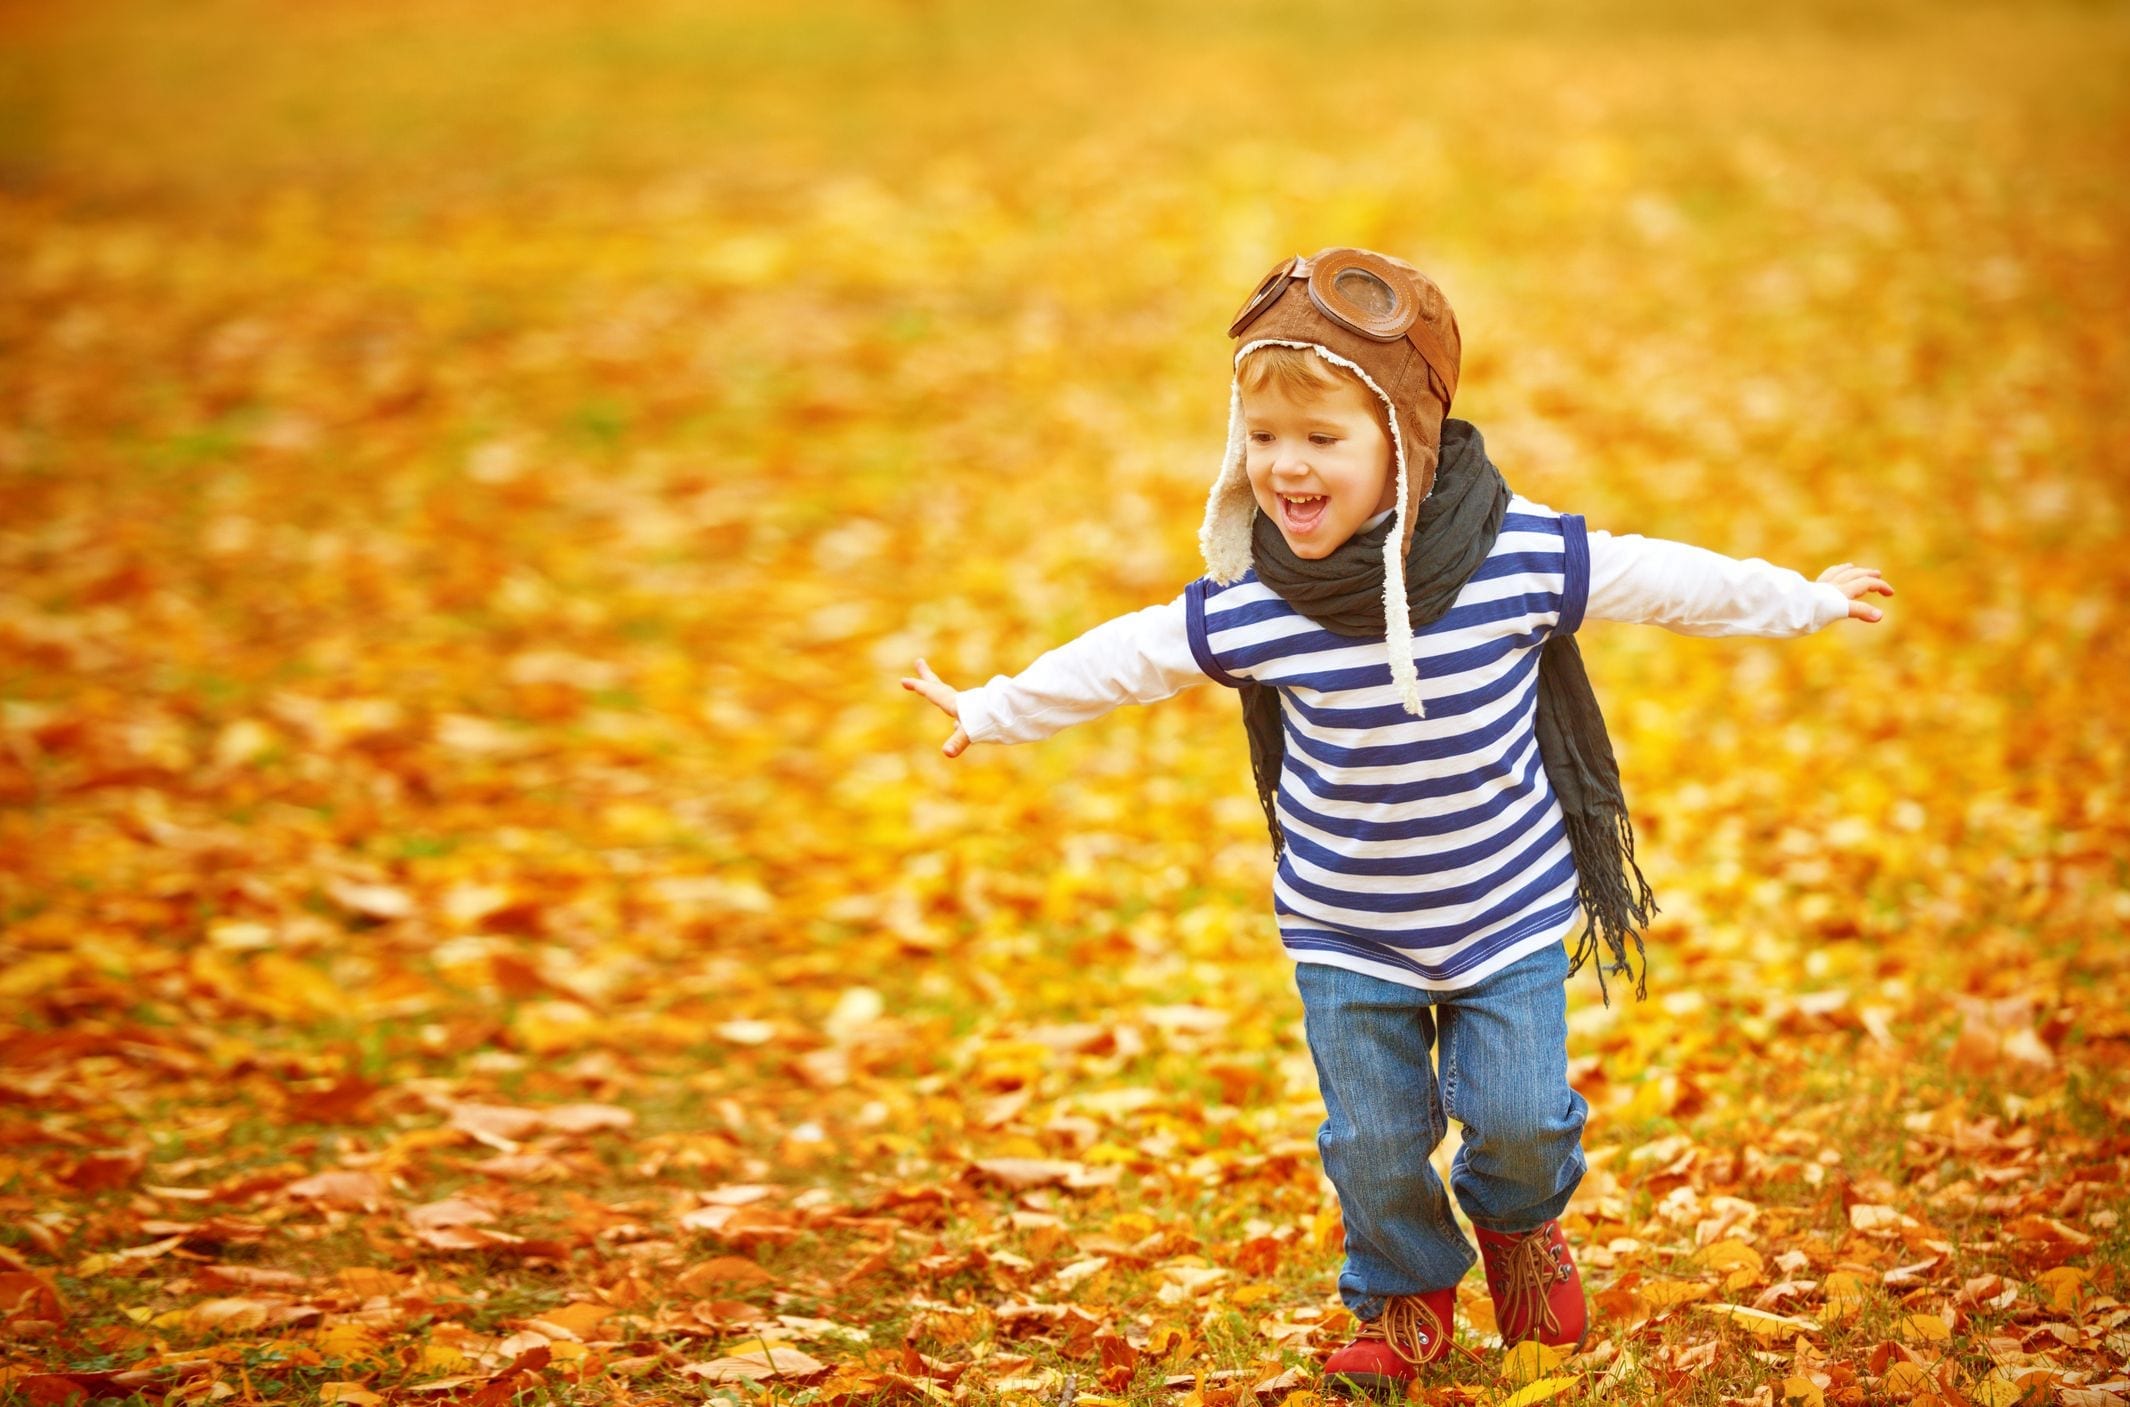 Young boy playing in leaves